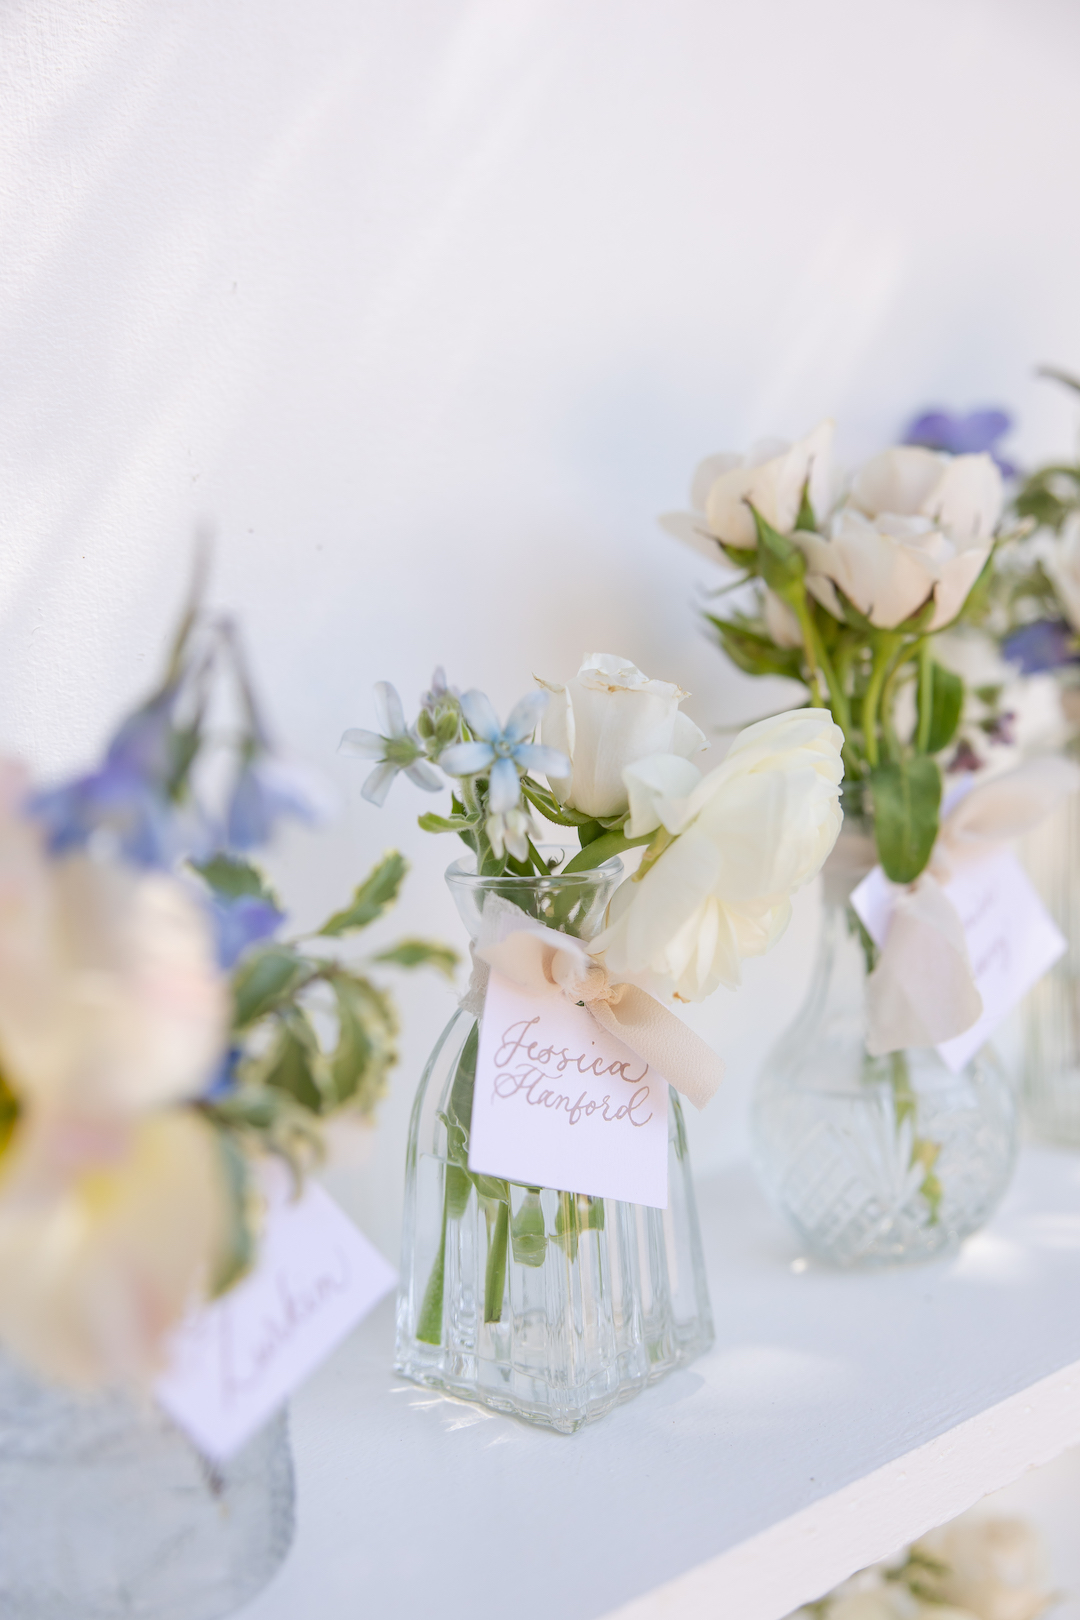 Whimsical floral arrangements delicately placed in an array of bud vases. 